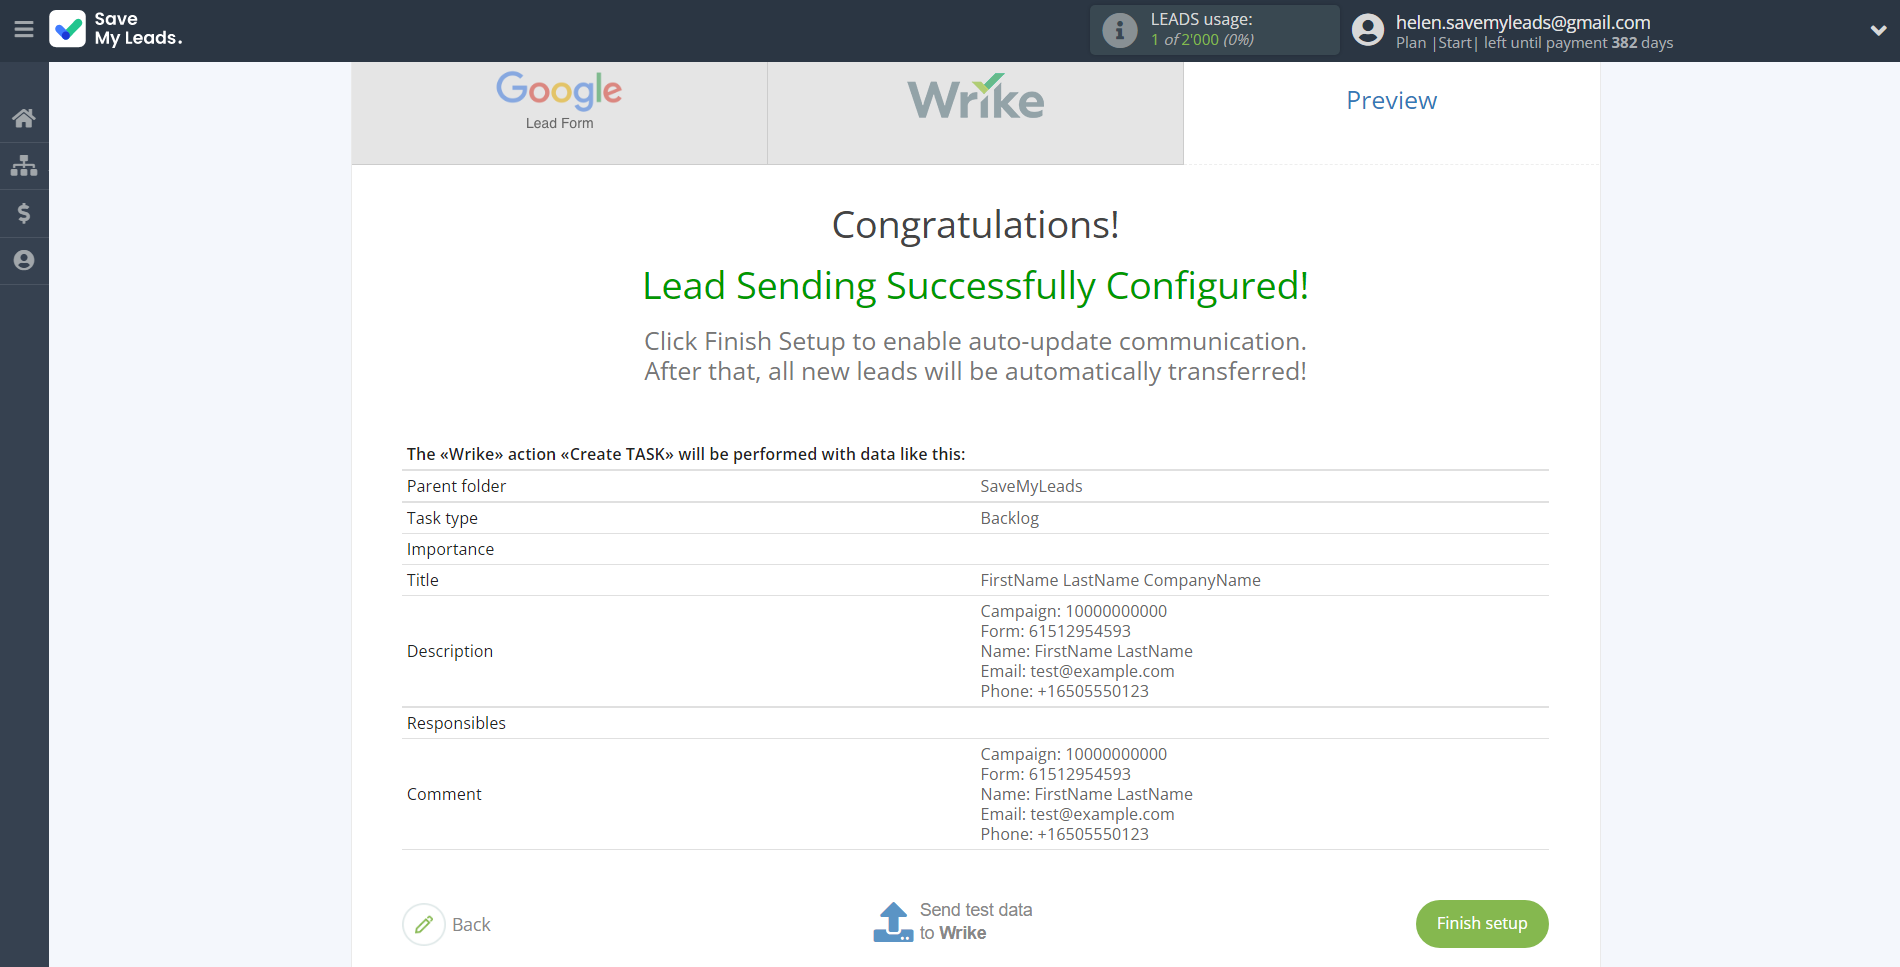 How to Connect Google Lead Form with Wrike | Test data